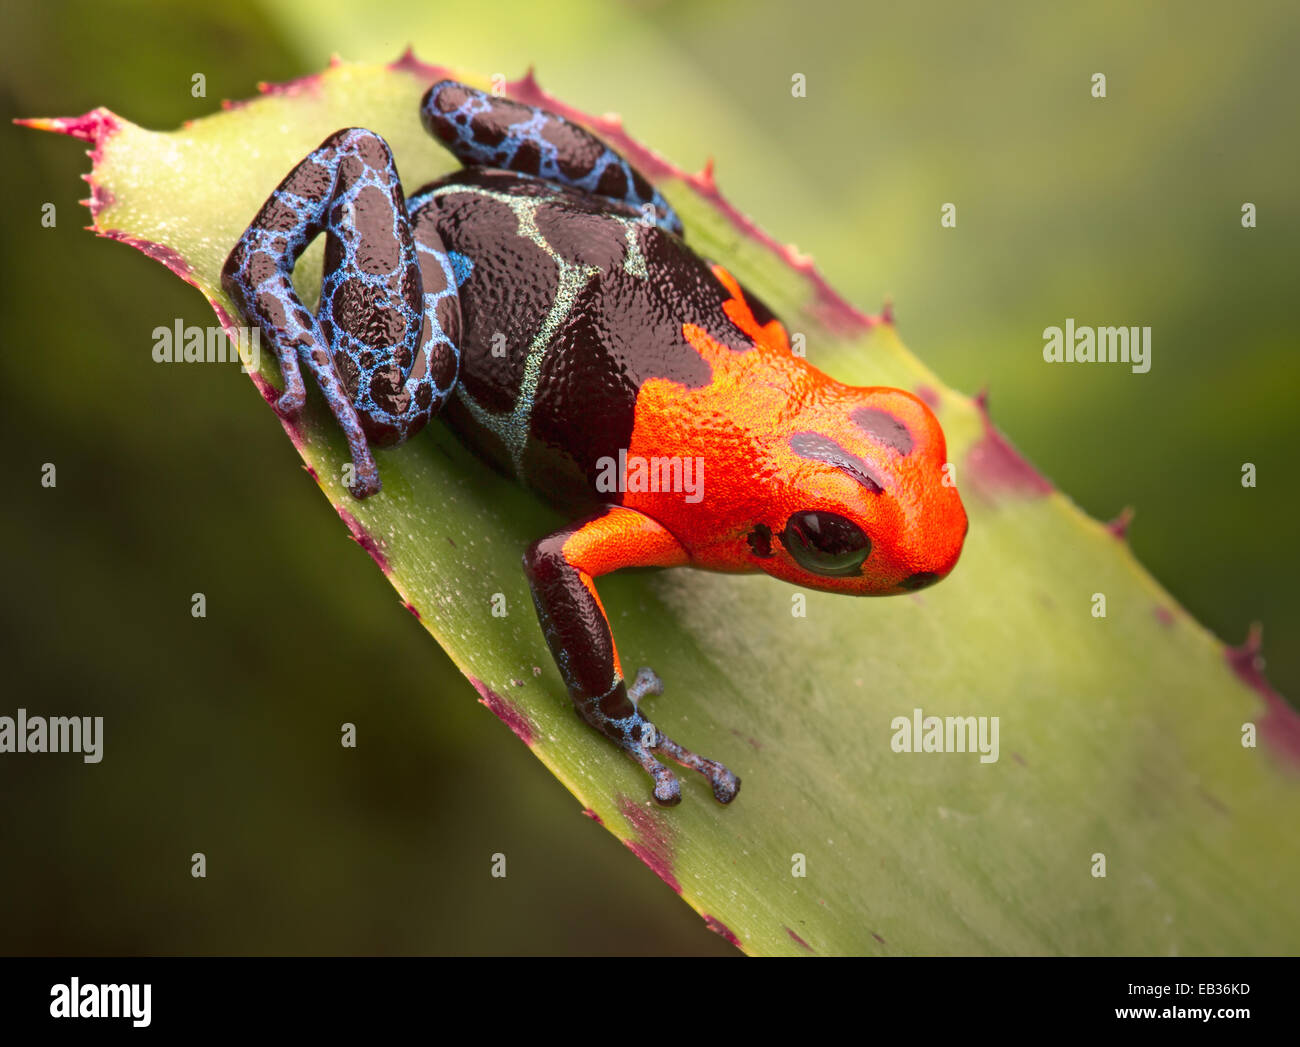 tropical poison arrow frog from amazon rain forest Peru. Bright coulored amphibian with red head and blue legs. Poisonous rainfo Stock Photo